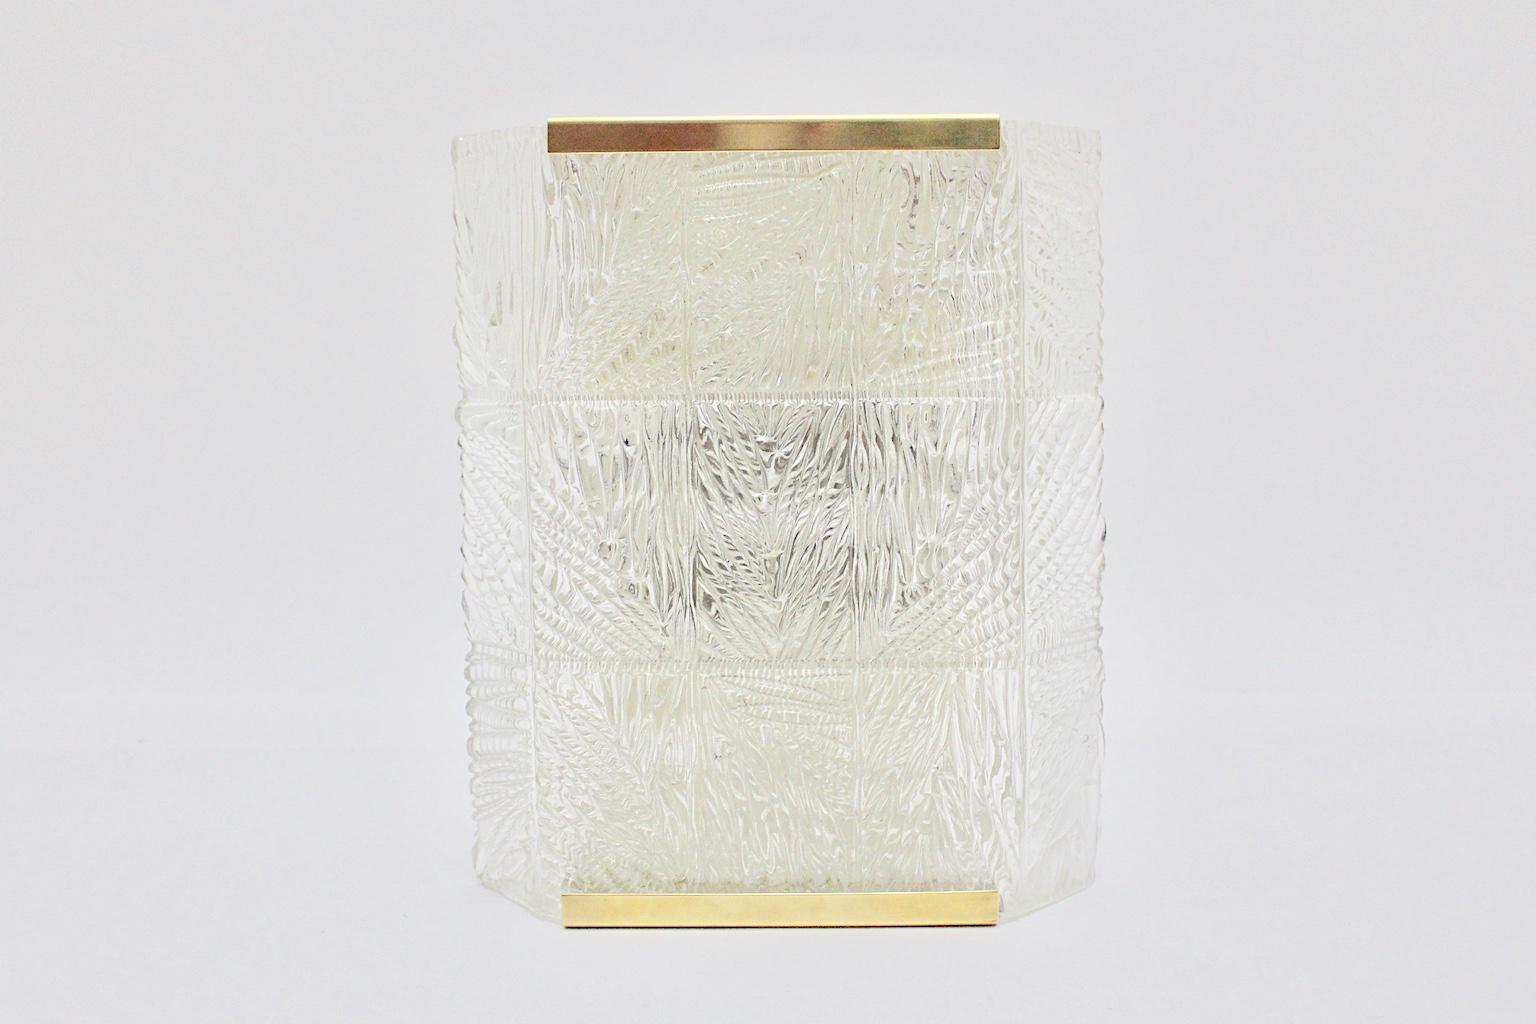  Mid-Century Modern vintage brass glass sconce or wall light, which was designed and manufactured by J. T. Kalmar 1960s, Vienna.
The wall-mounted sconce shows amazing and timeless design features.
With brass details and clear textured glass the